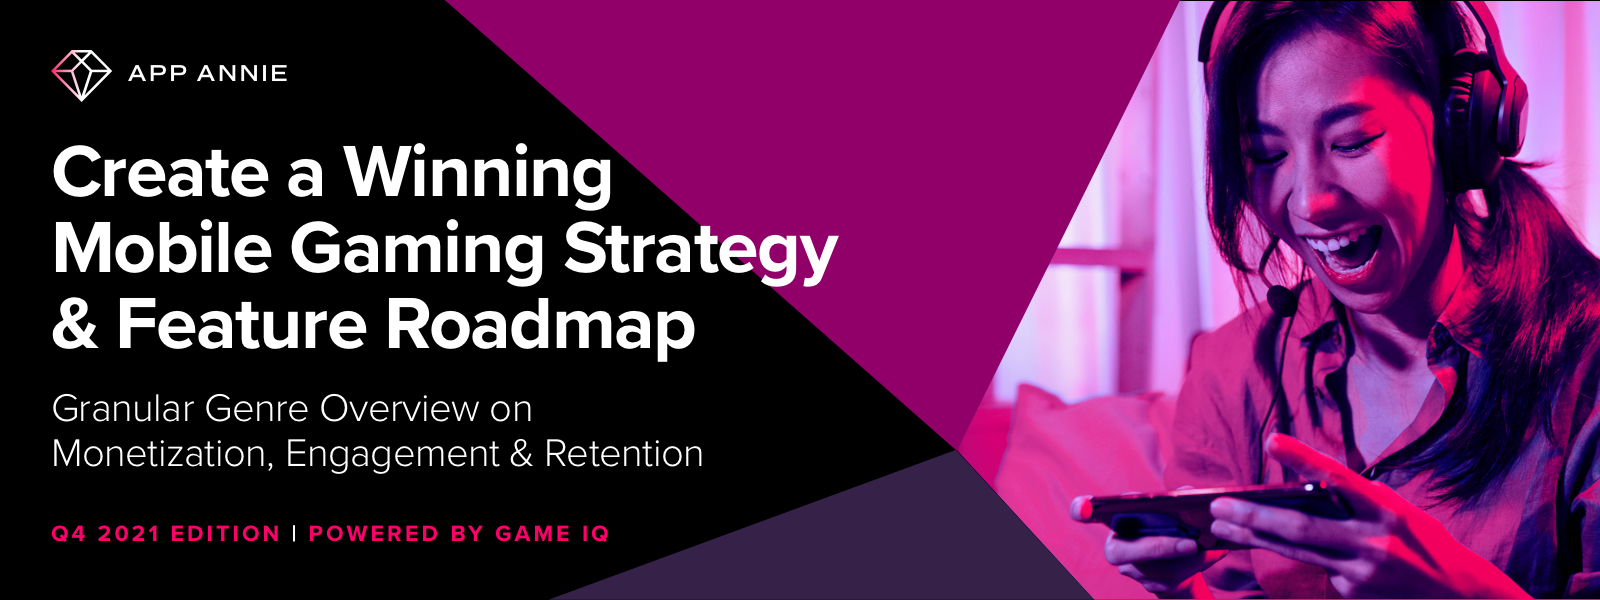 Create A Winning Mobile Gaming Strategy and Feature Roadmap